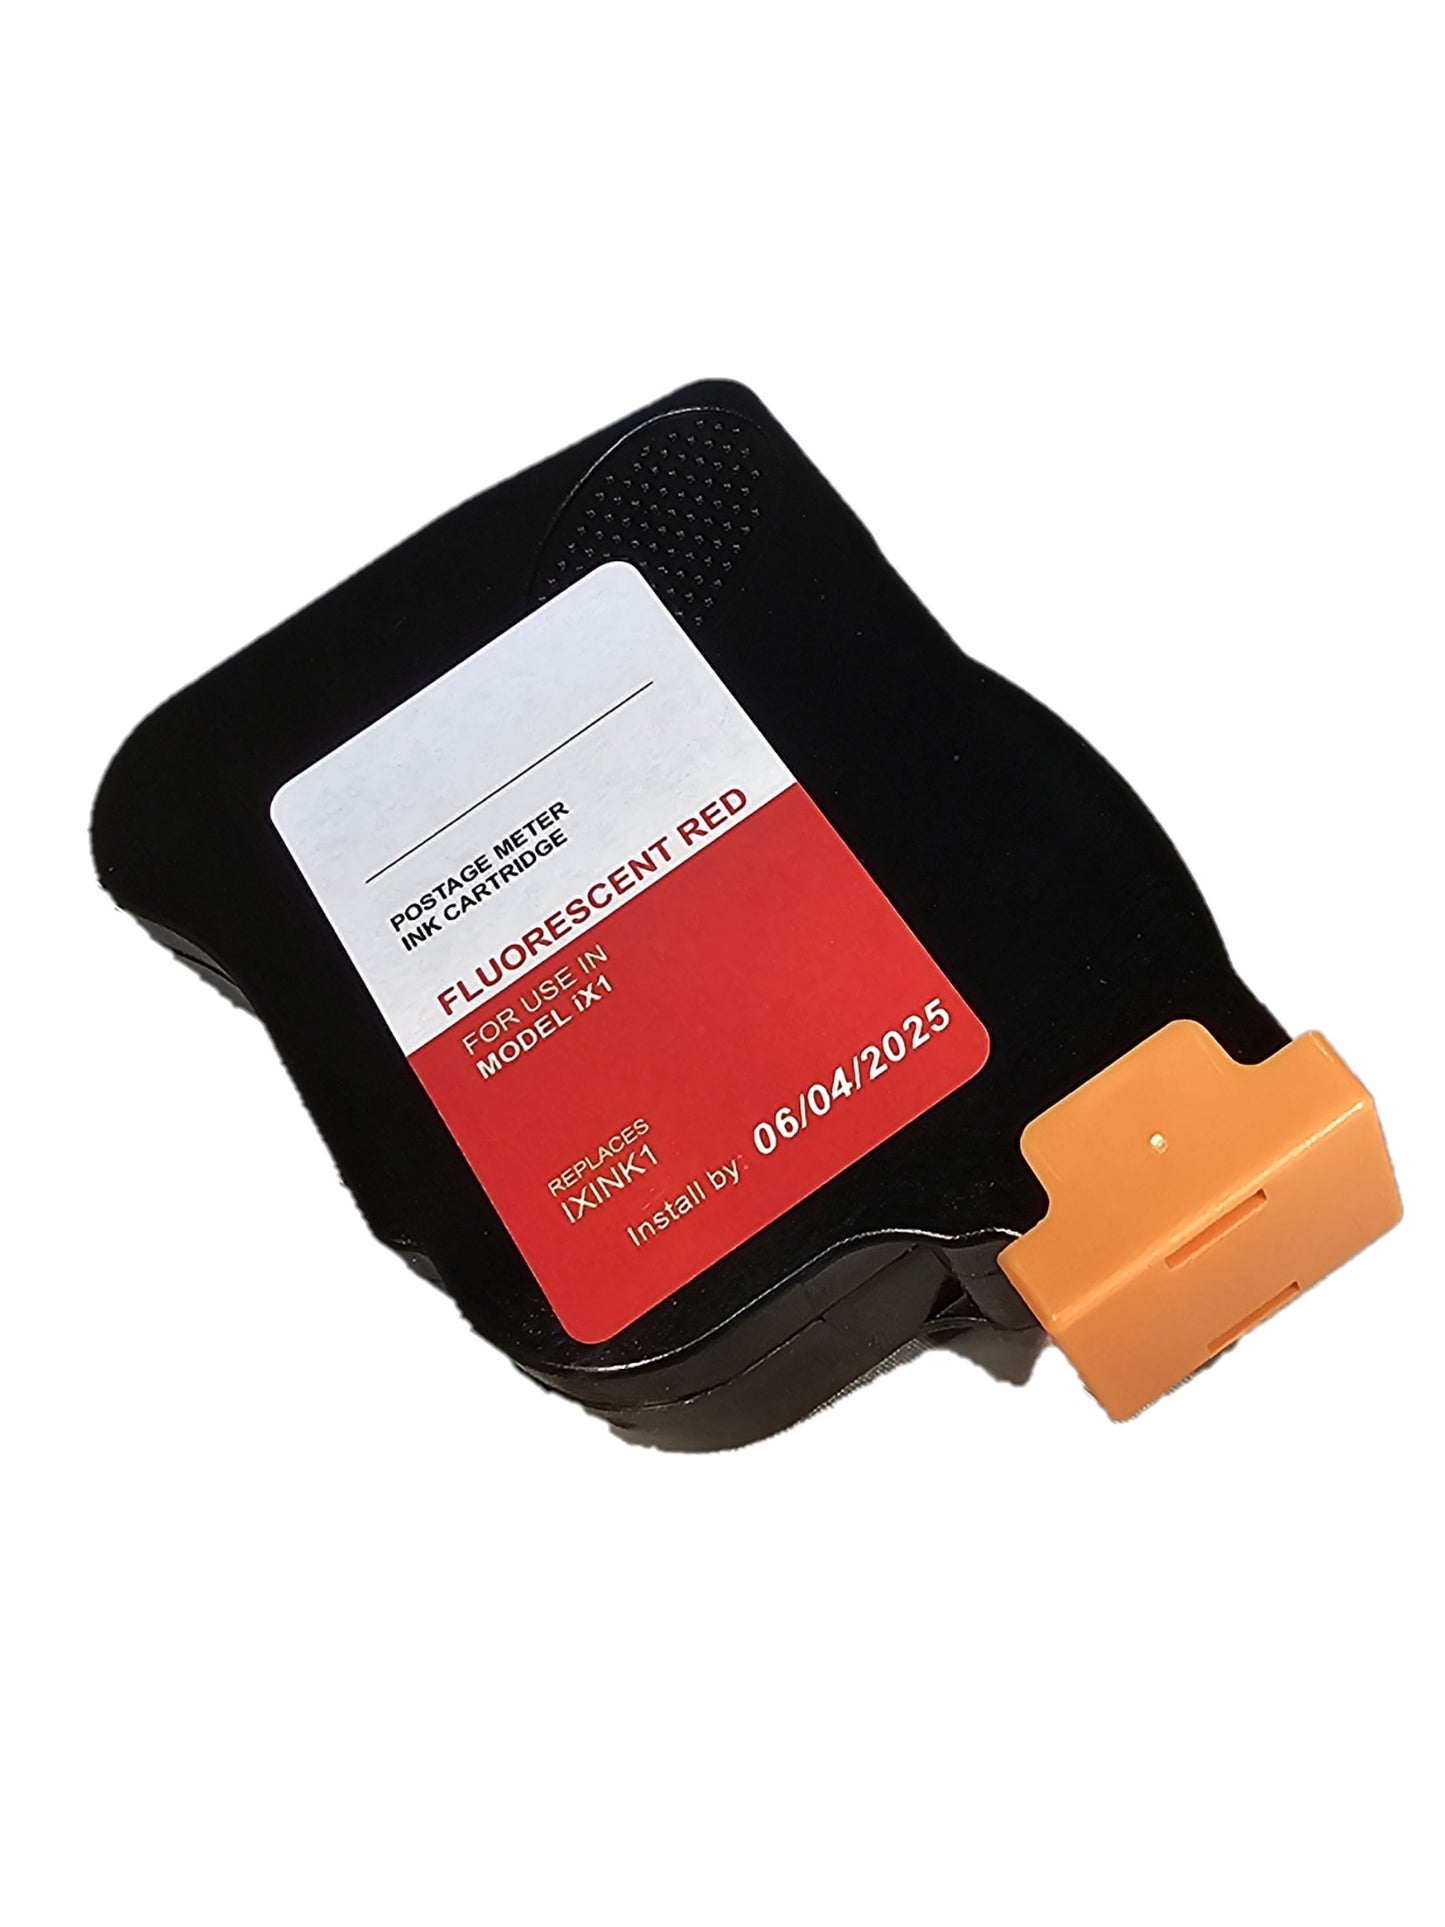 IXINK1 Red Ink Cartridge for iX-1 Postage Meters  Compares to IXINK1, Sure.jet # A0146668